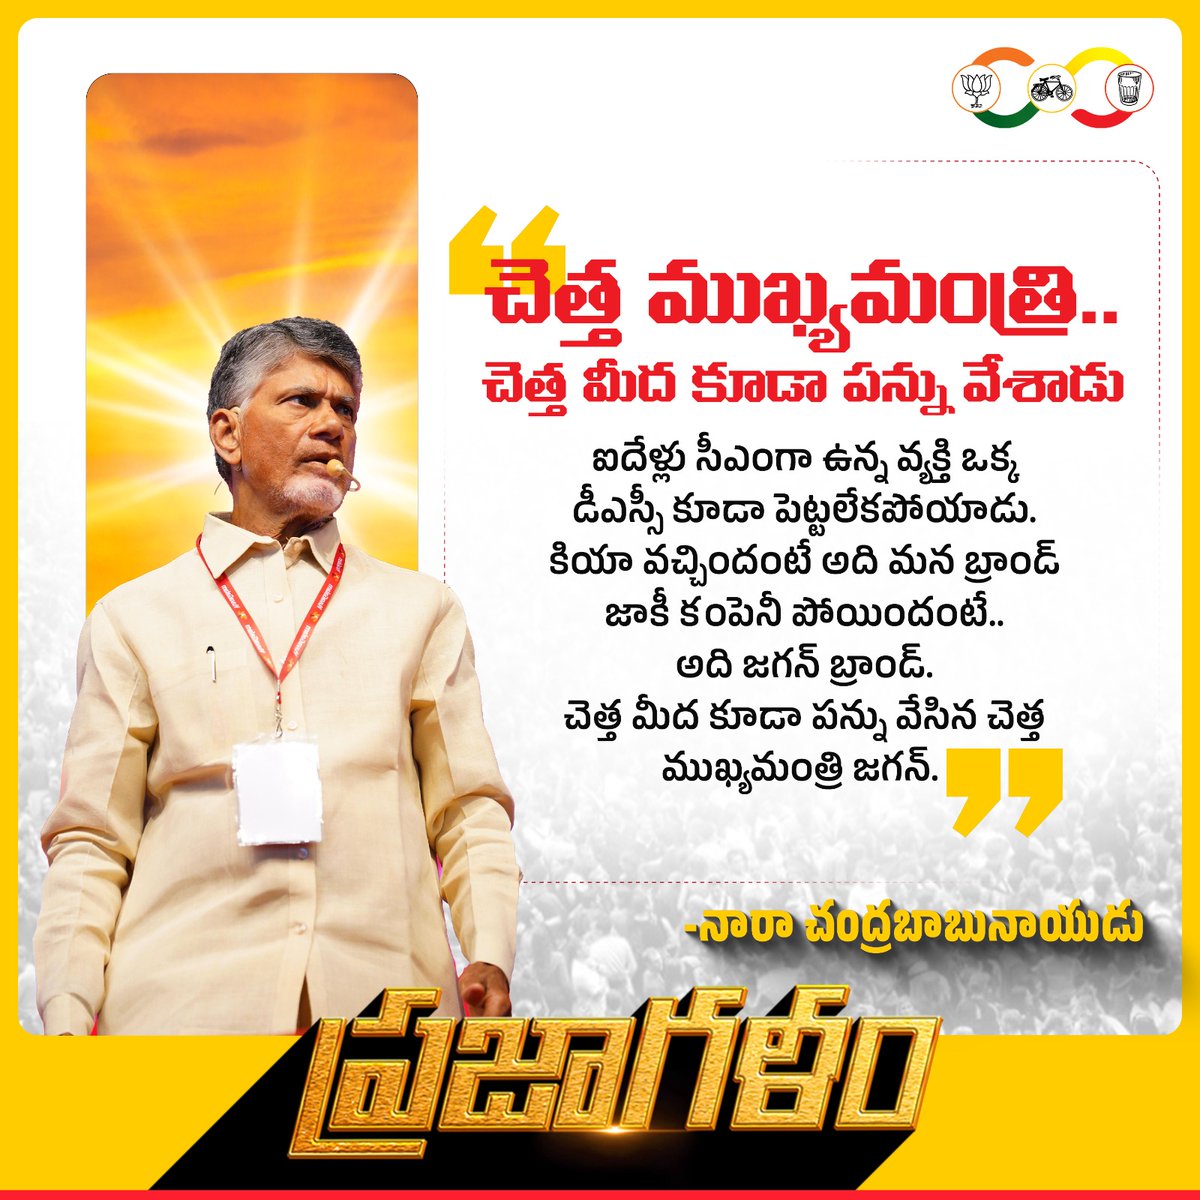 Creating wealth and providing welfare is possible only with Chandrababu.
#BabuForJanaRajyam